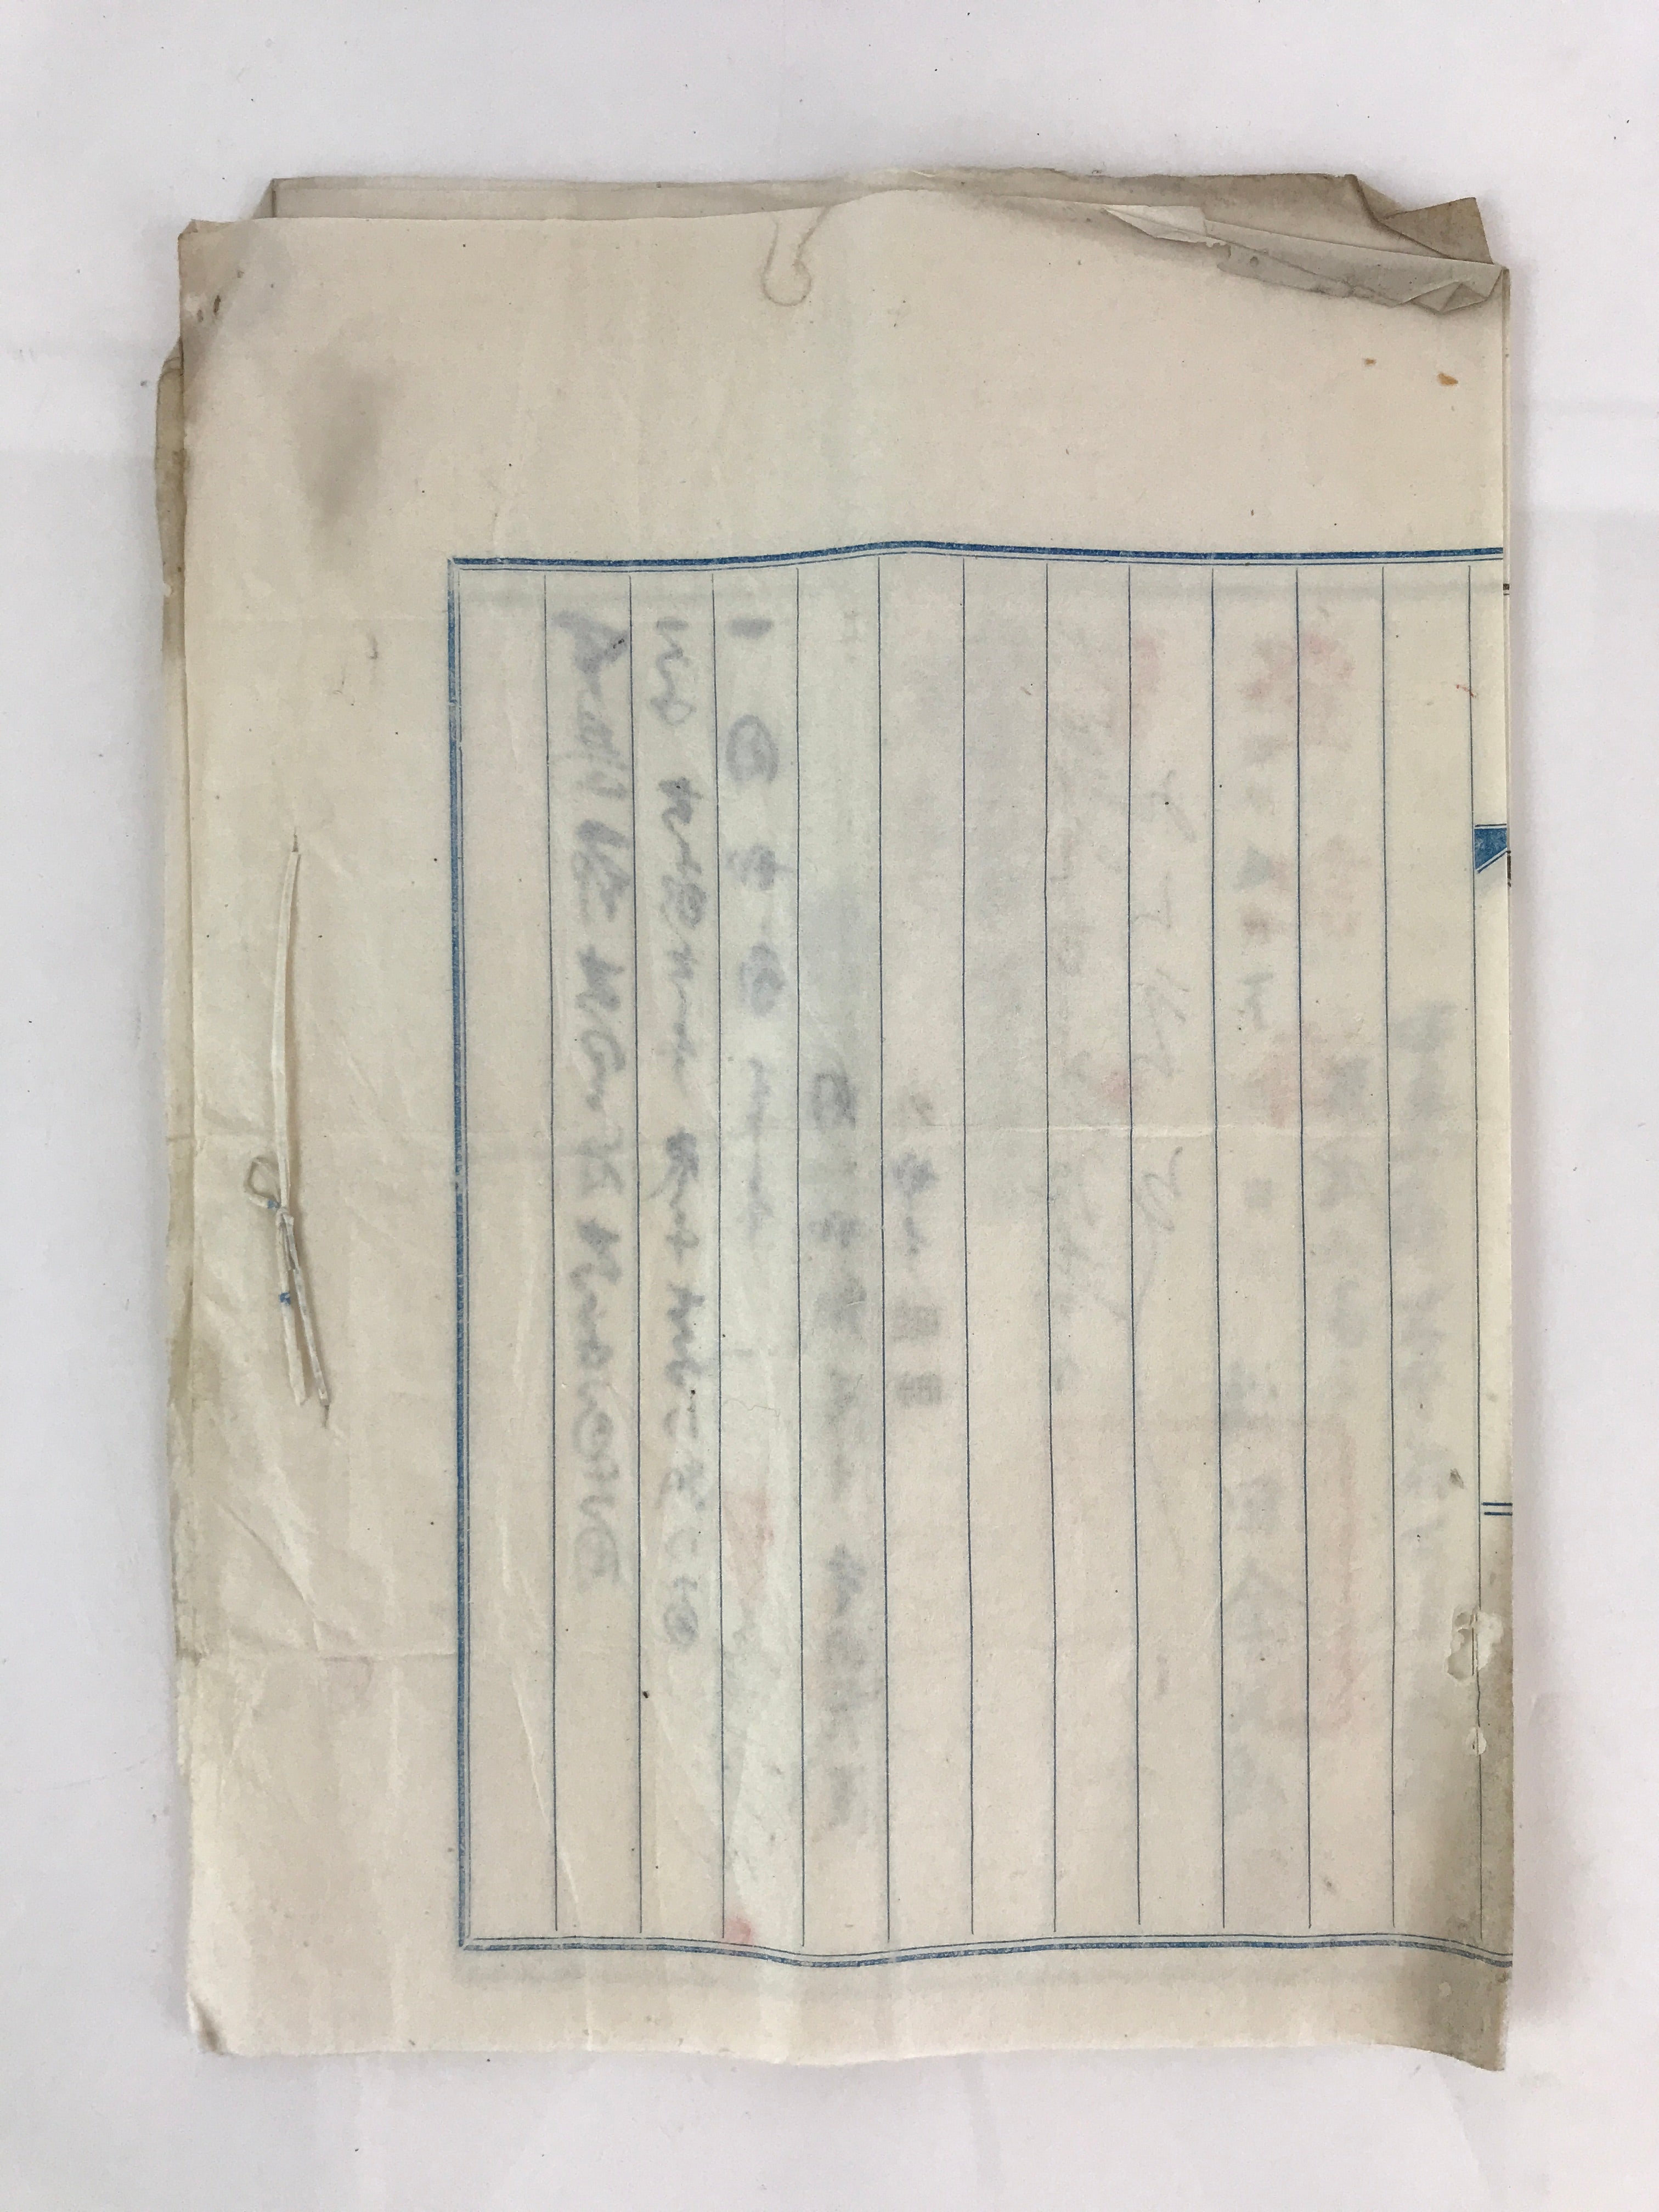 Antique C1914 Japanese House Purchase Certificate Taisho Period Paper P309